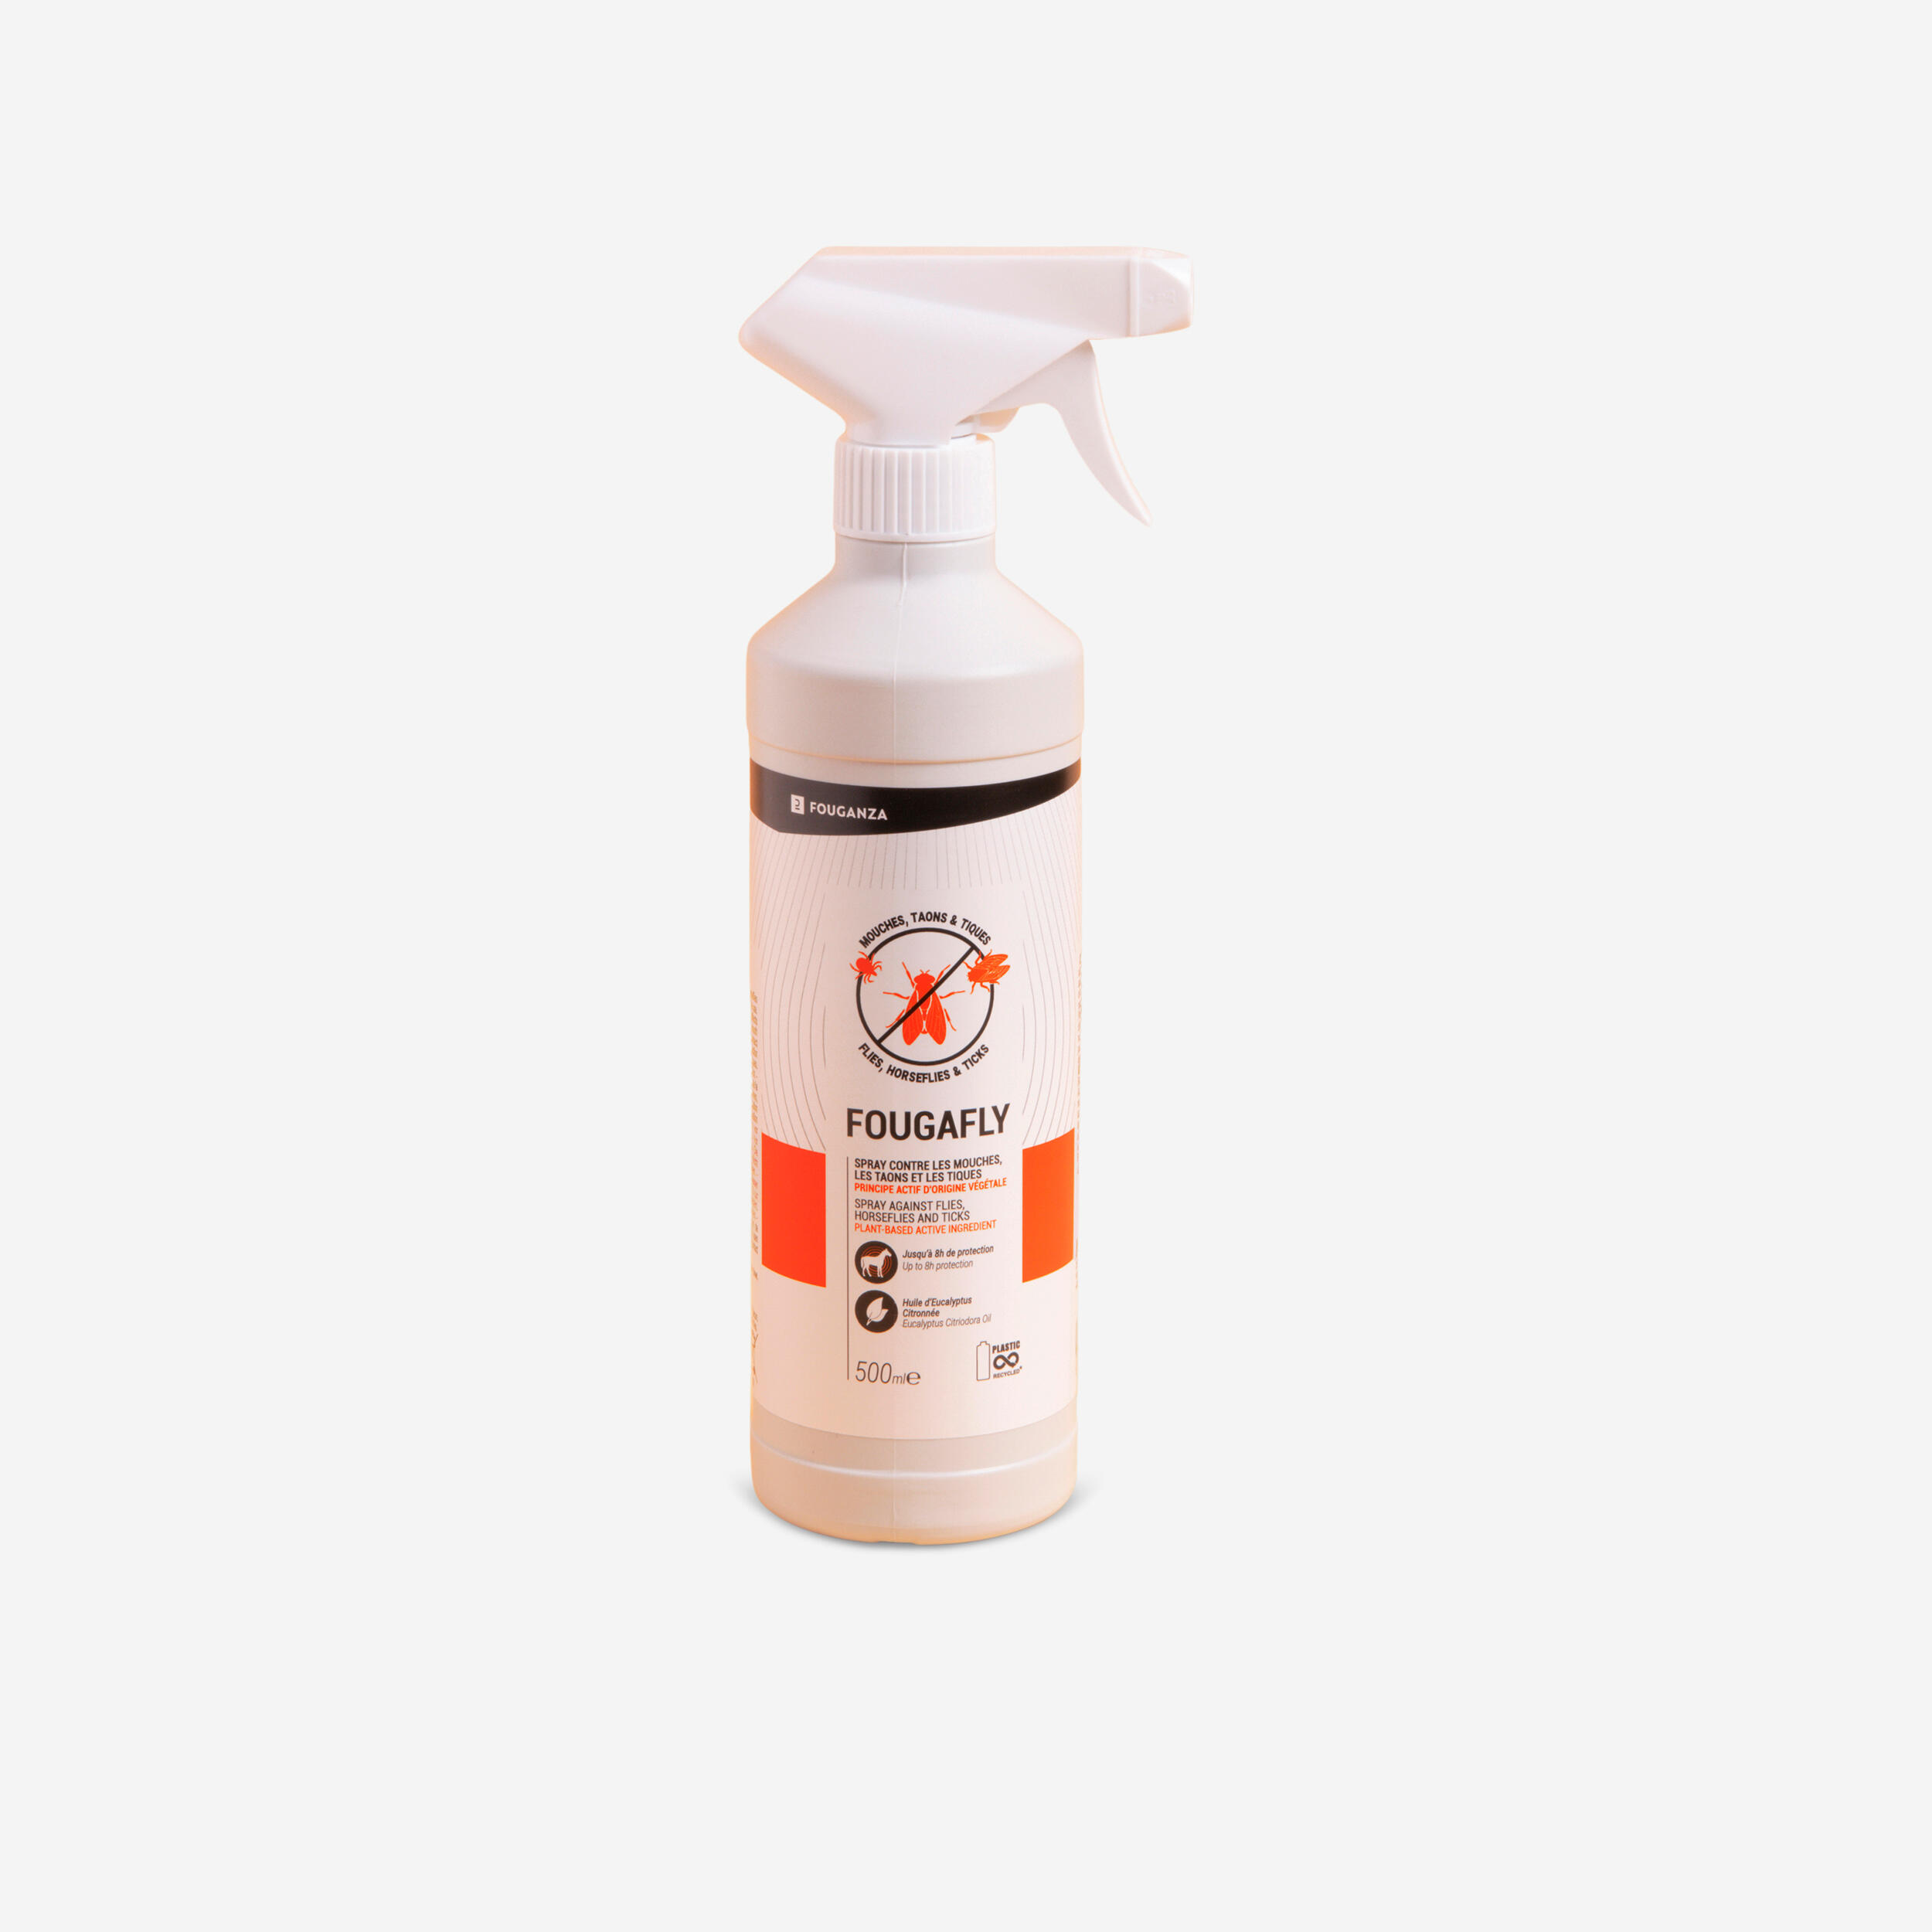 FOUGANZA Horse Riding Insect Repellent Spray for Horse and Pony Fougafly - 500 ml